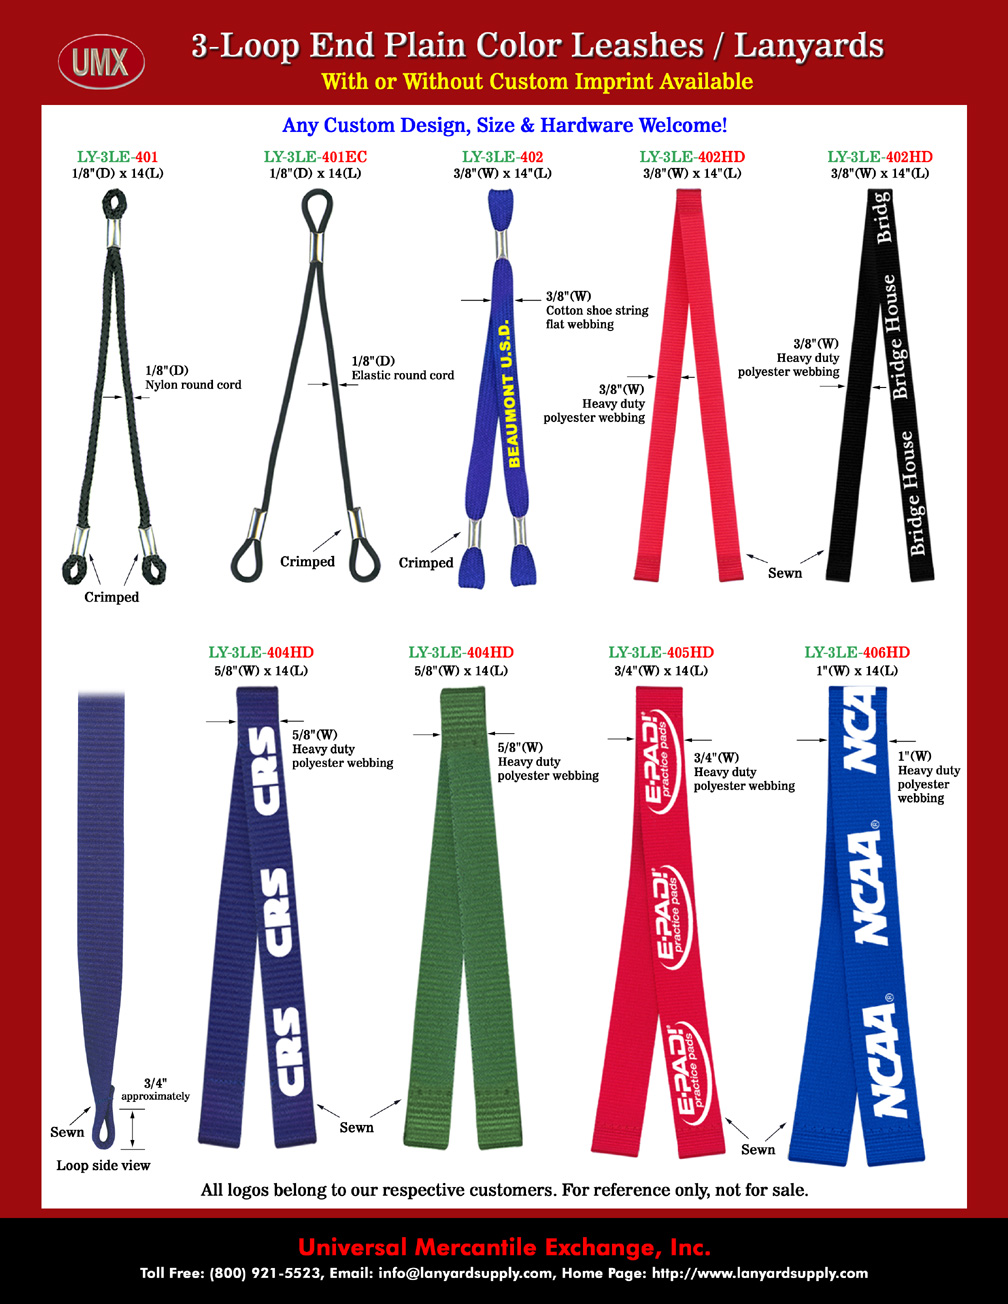 2-Loop-End Leashes - Overall View - Nylon, Elastic, Fabric, Cotton, Polyester Plastic Cord or Strap Leash Lanyards.